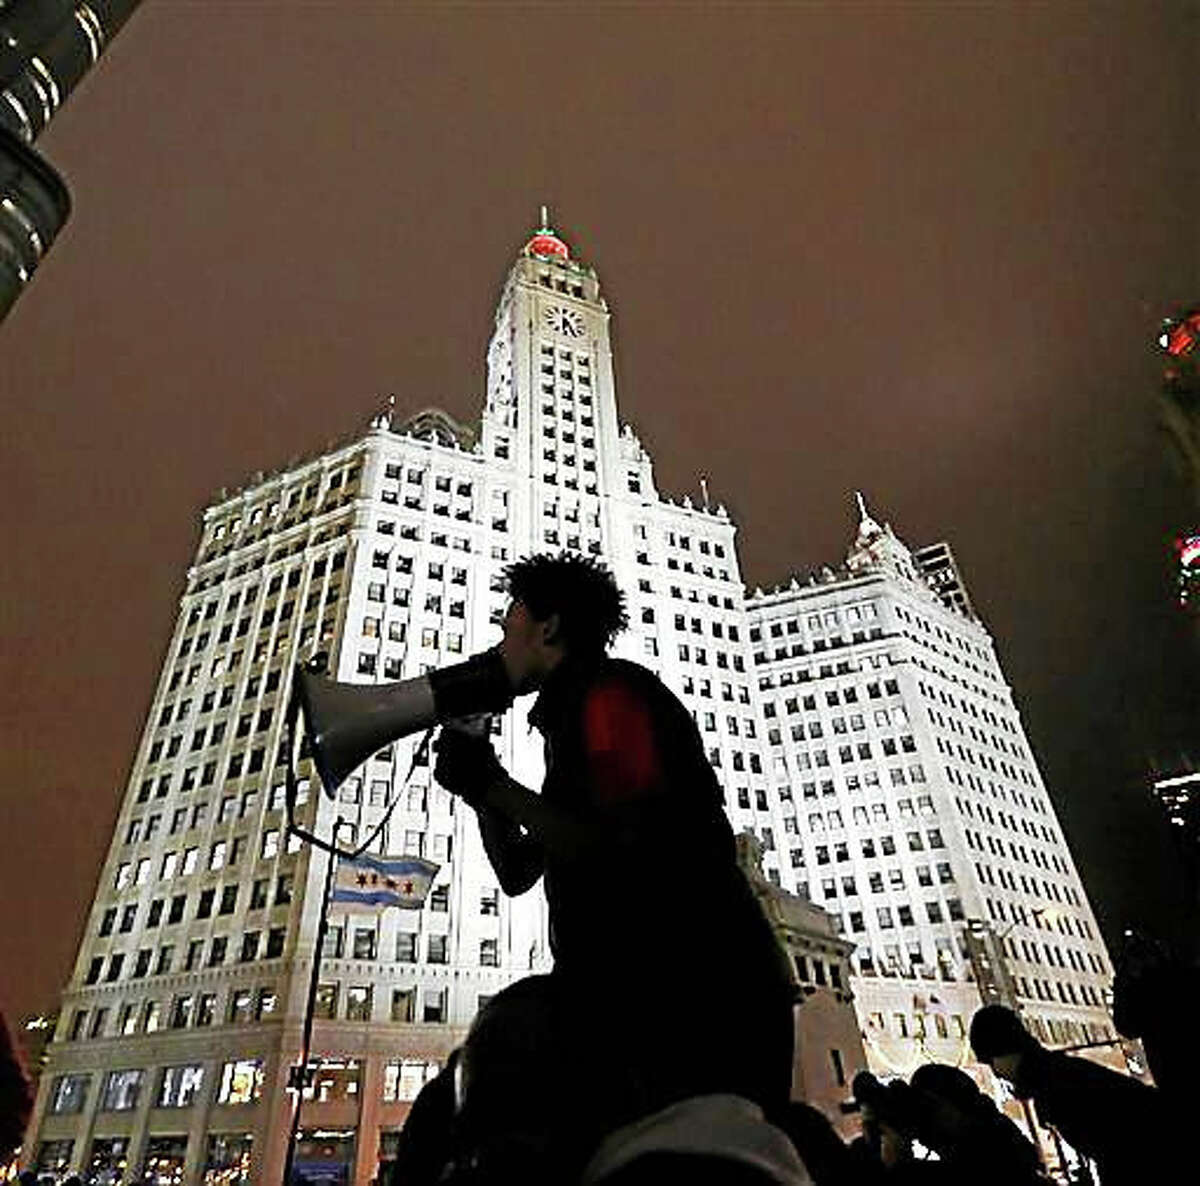 A protester is silhouetted against Chicago’s famed Wrigley Building as he directs others to shutdown traffic on both sides of the Michigan Ave. bridge over the Chicago River, Wednesday, Nov. 25, 2015, one day after murder charges were brought against police officer Jason Van Dyke in the killing of 17-year-old Laquan McDonald.